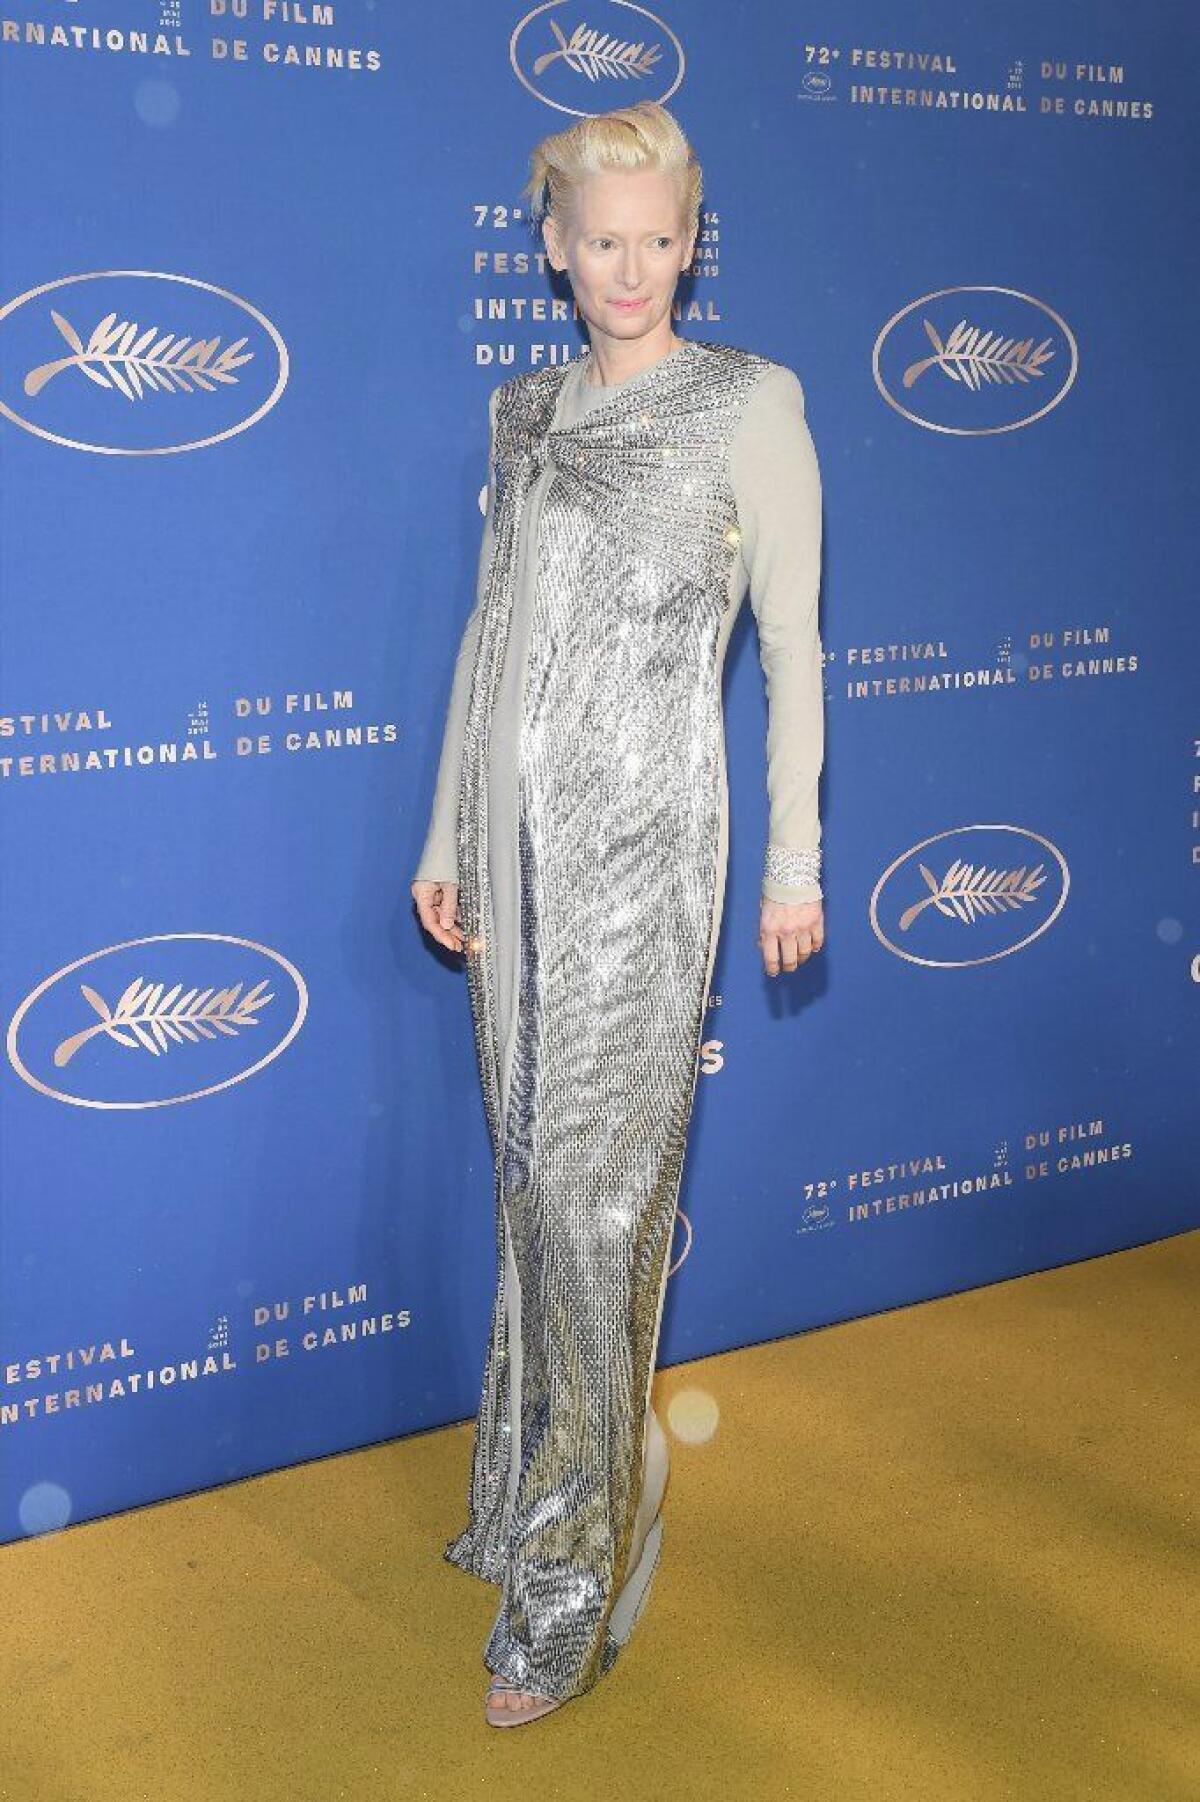 Tilda Swinton arrives at the Gala Dinner during the annual Cannes Film Festival on May 14.